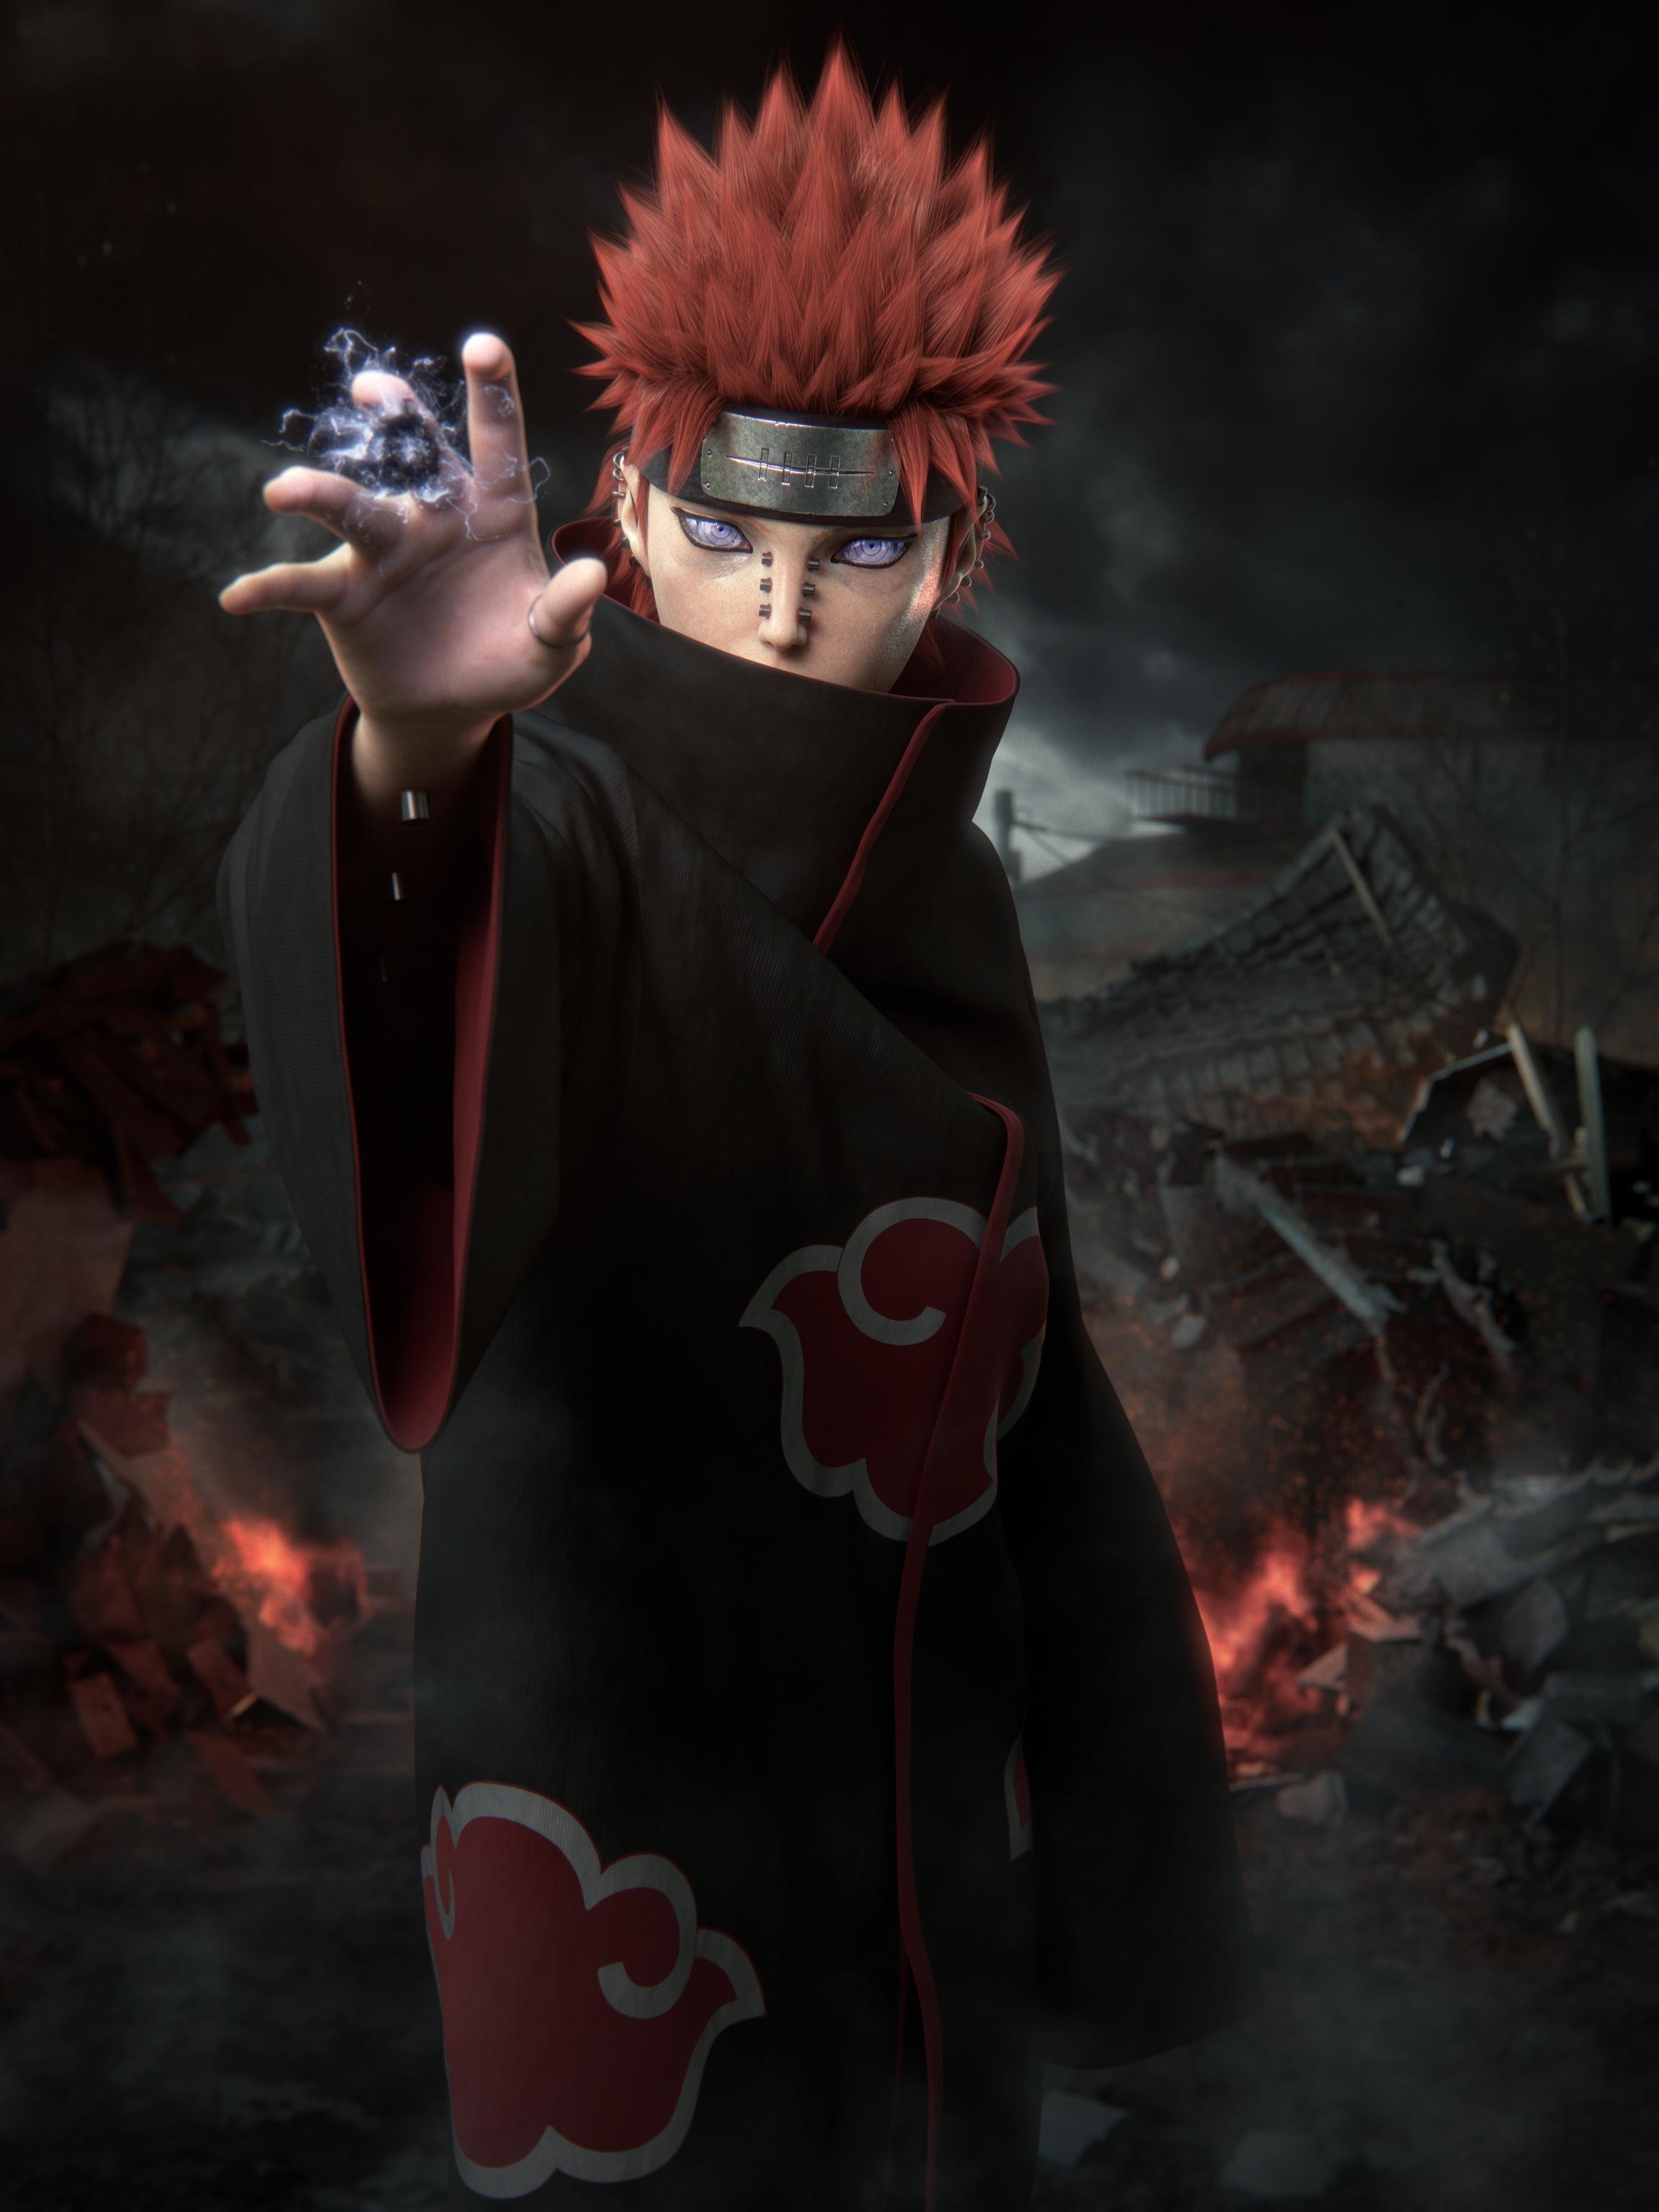 Mobile wallpaper Anime Naruto Madara Uchiha Obito Uchiha Sage Of Six  Paths 1129072 download the picture for free